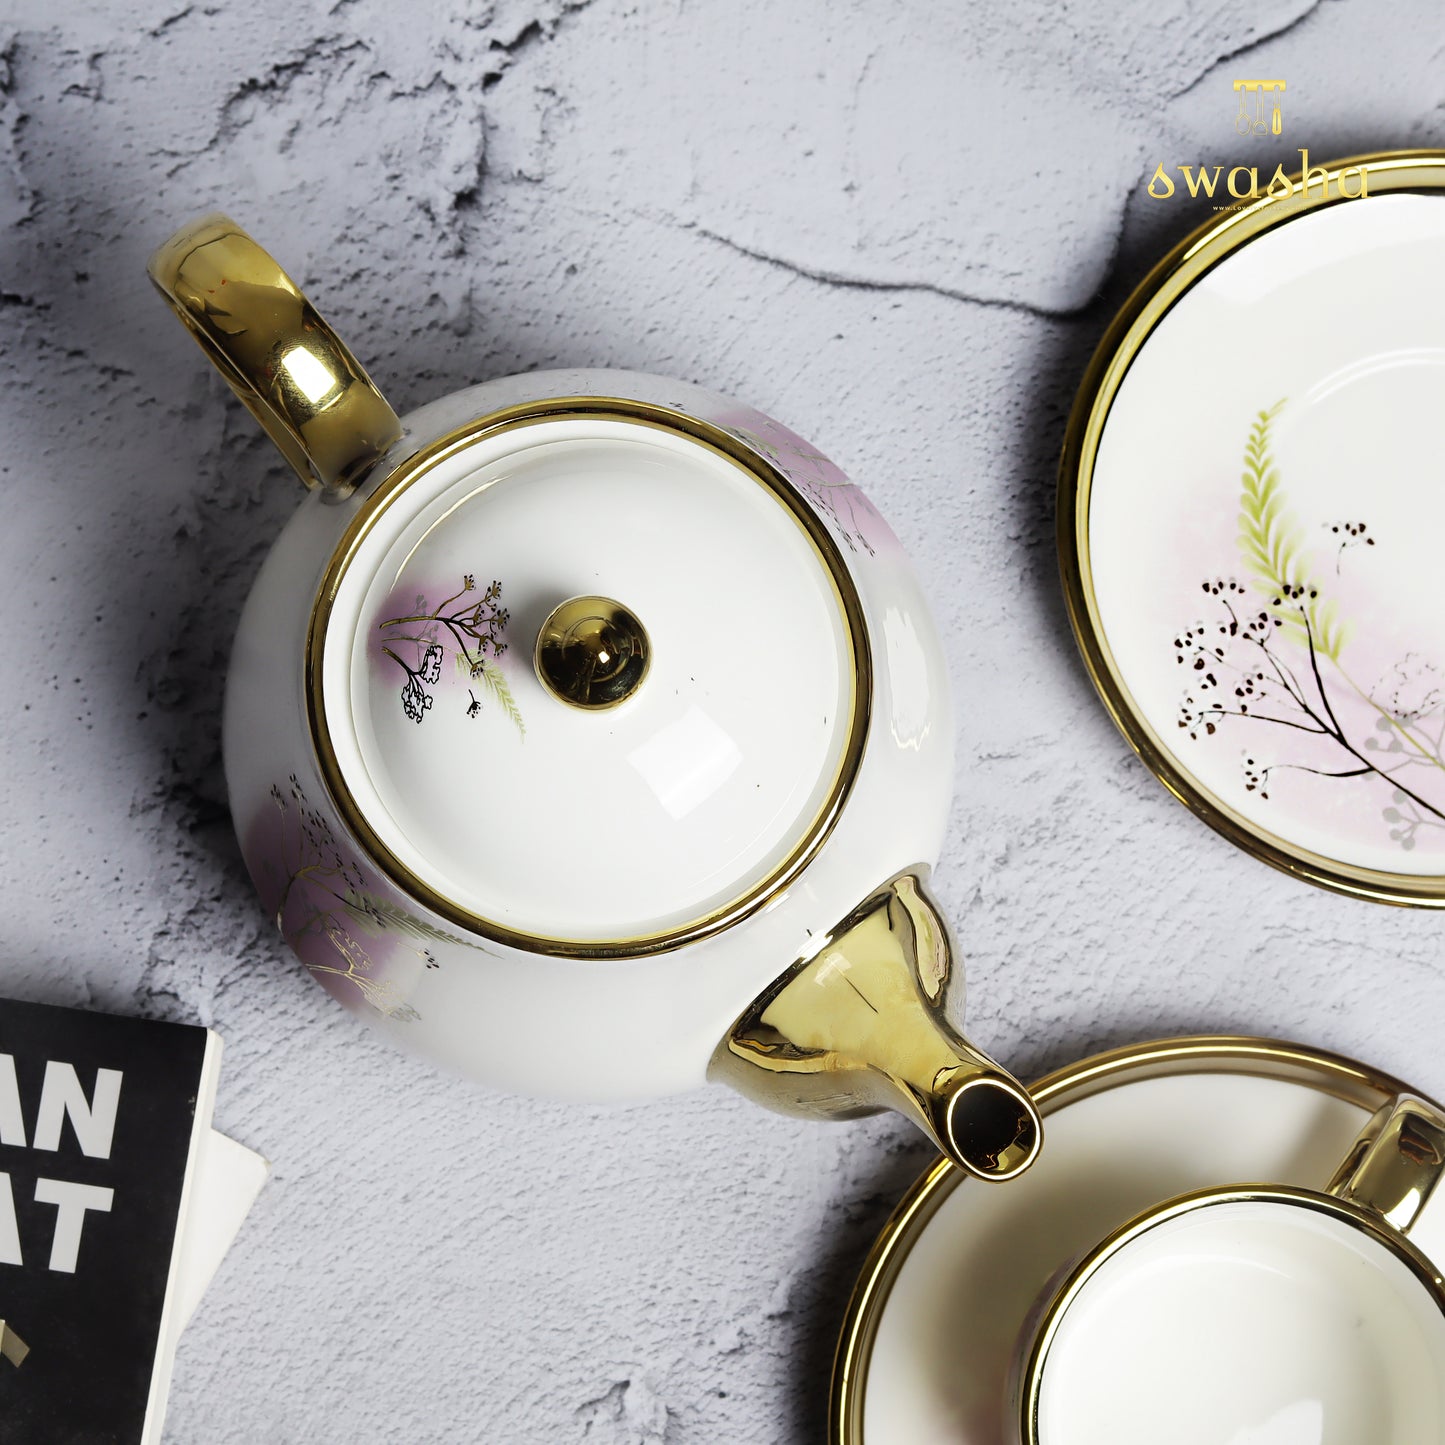 Swasha Home Decor - Ceramic Cups, Saucers, and Kettle Set: Elegance Meets Functionality